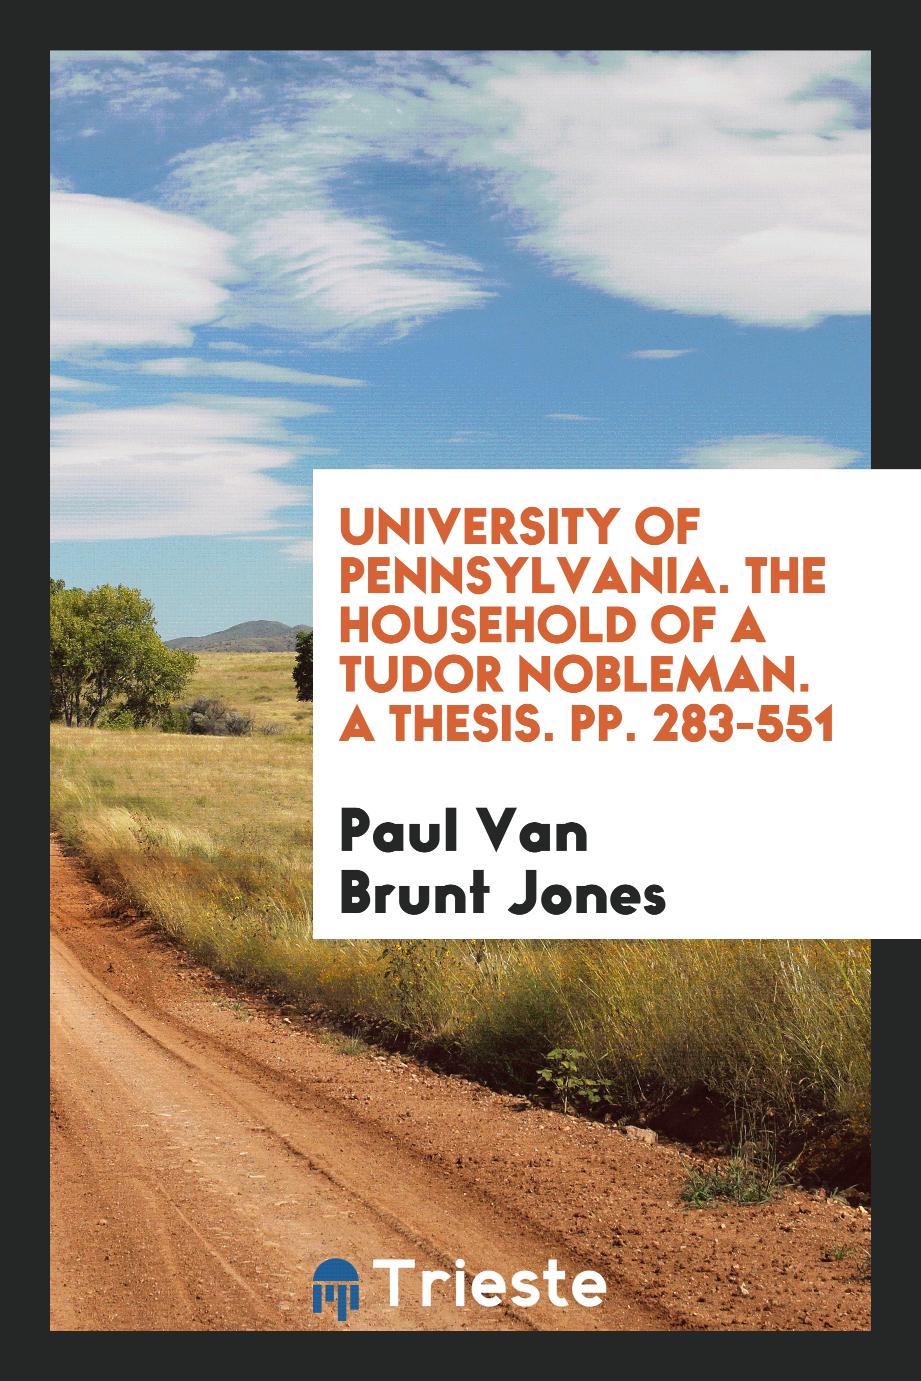 University of Pennsylvania. The household of a Tudor nobleman. A Thesis. pp. 283-551